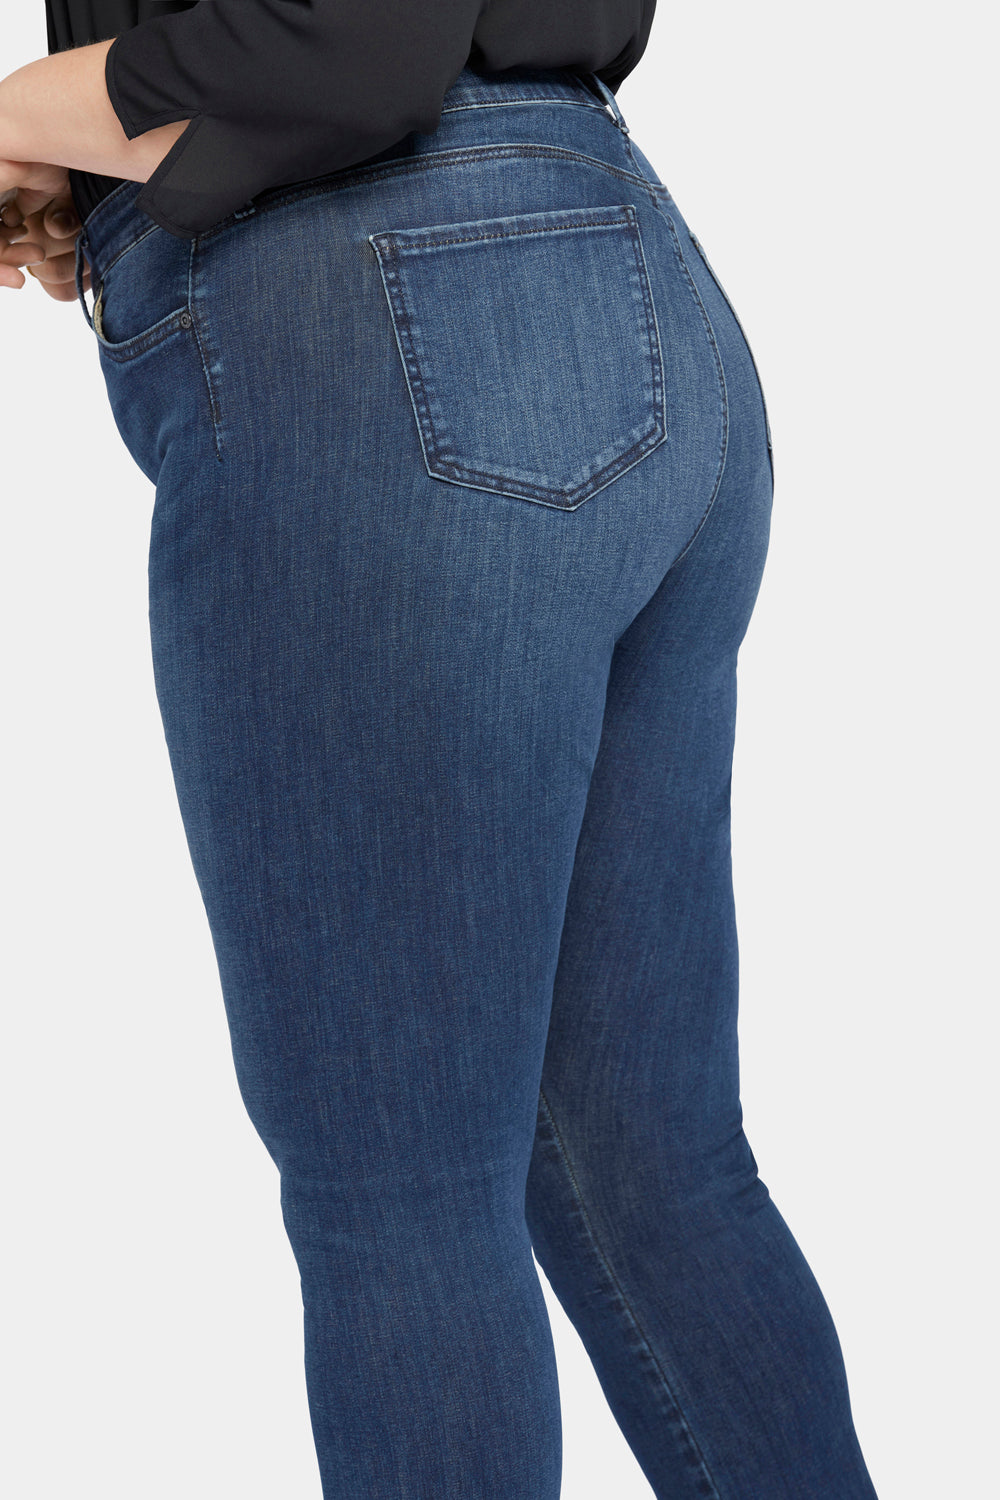 Le Silhouette Slim Bootcut Jeans In Long Inseam Plus Size With High Rise -  Precious Blue | NYDJ